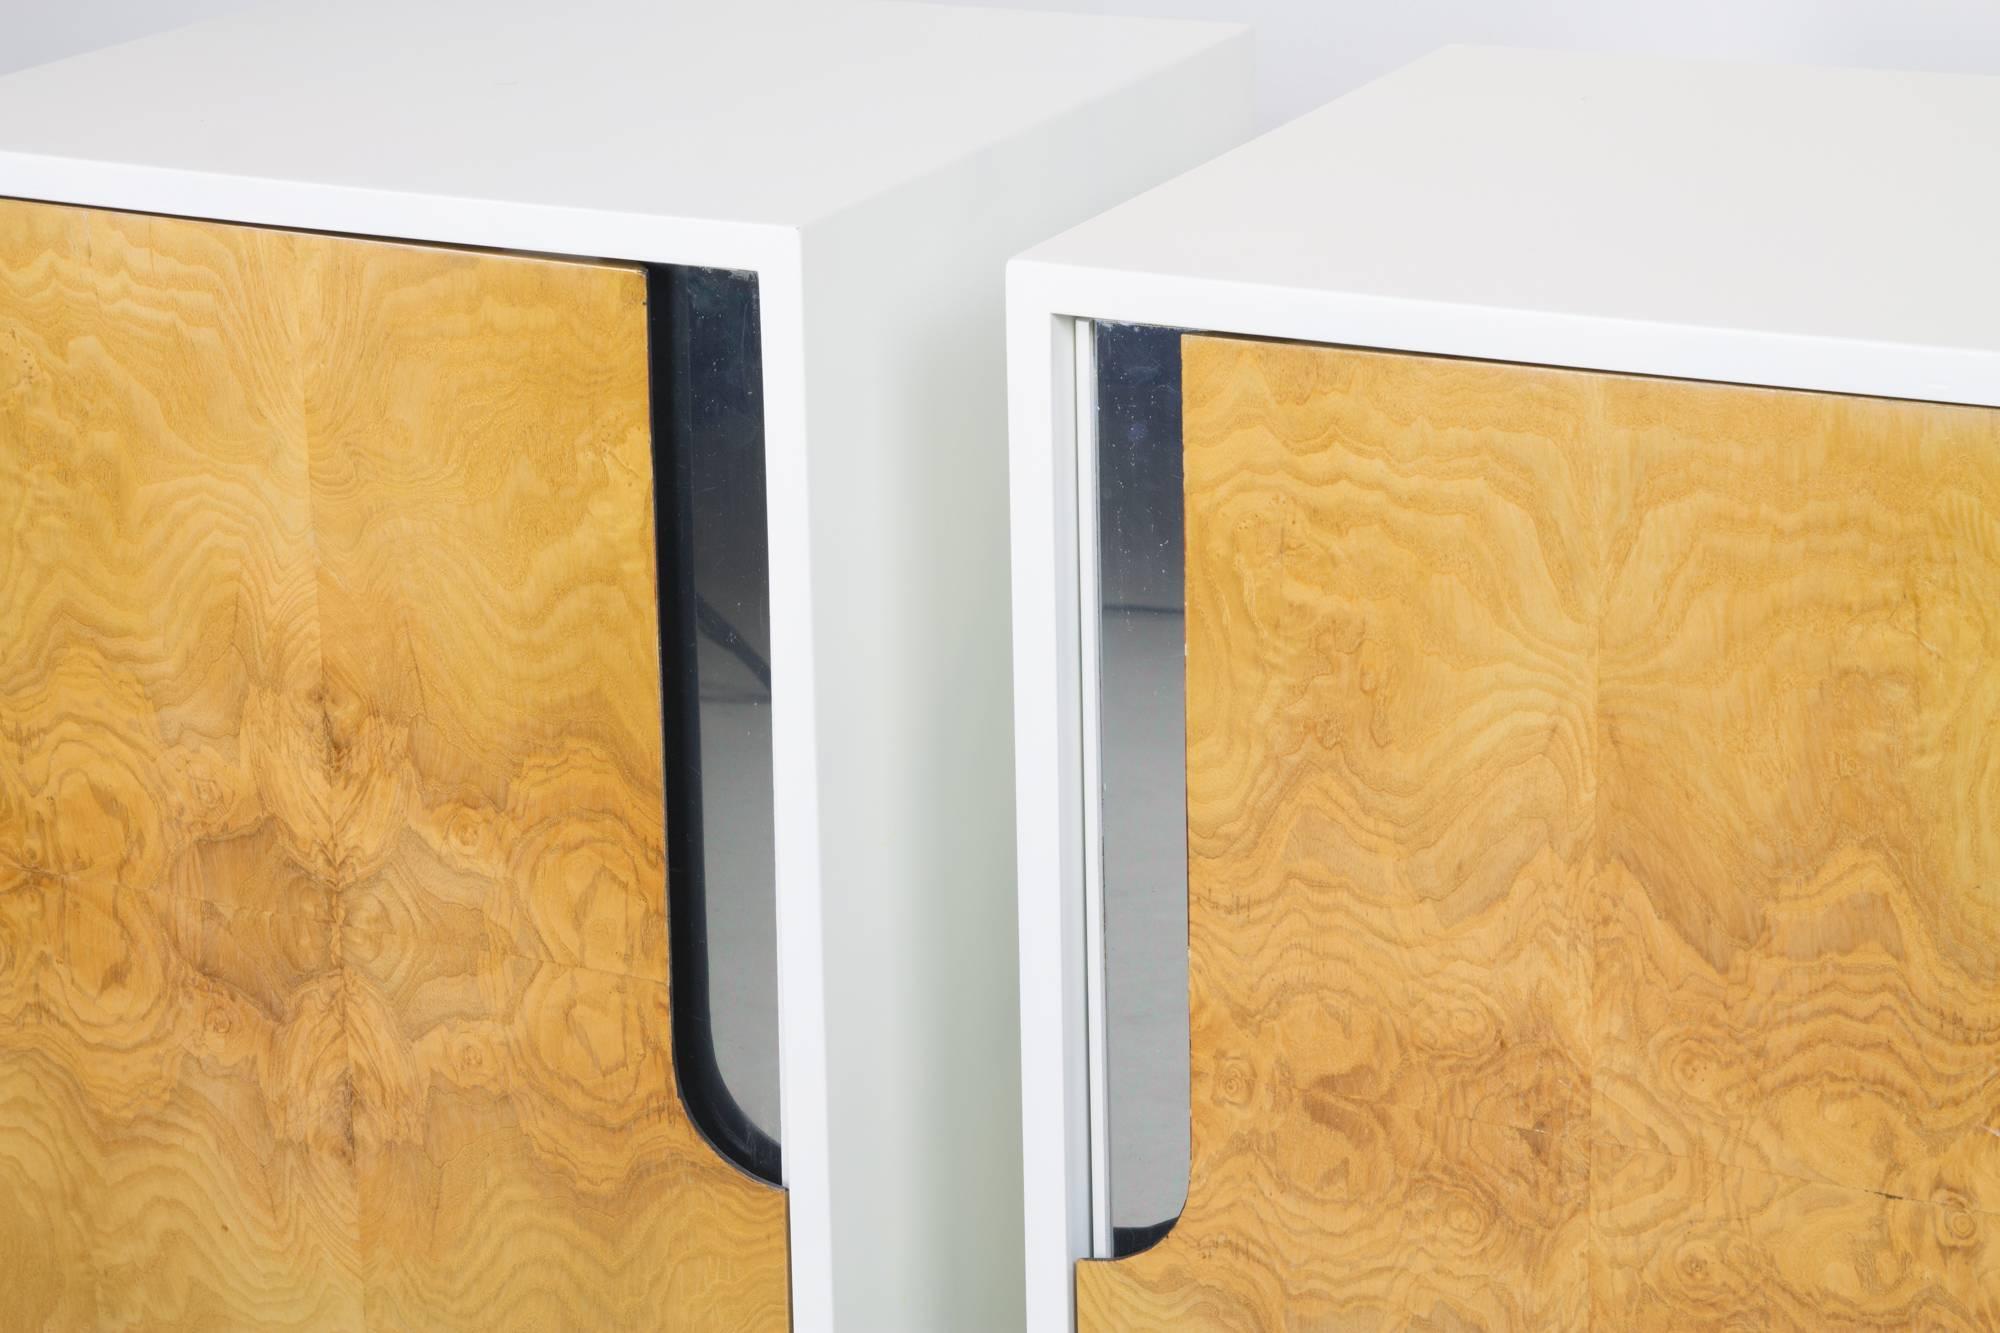 A pair of nightstands by Milo Baughman in white, each with one interior shelf. The doors feature figural bookmatched burl veneer and slivers of mirrored surface behind the pulls.